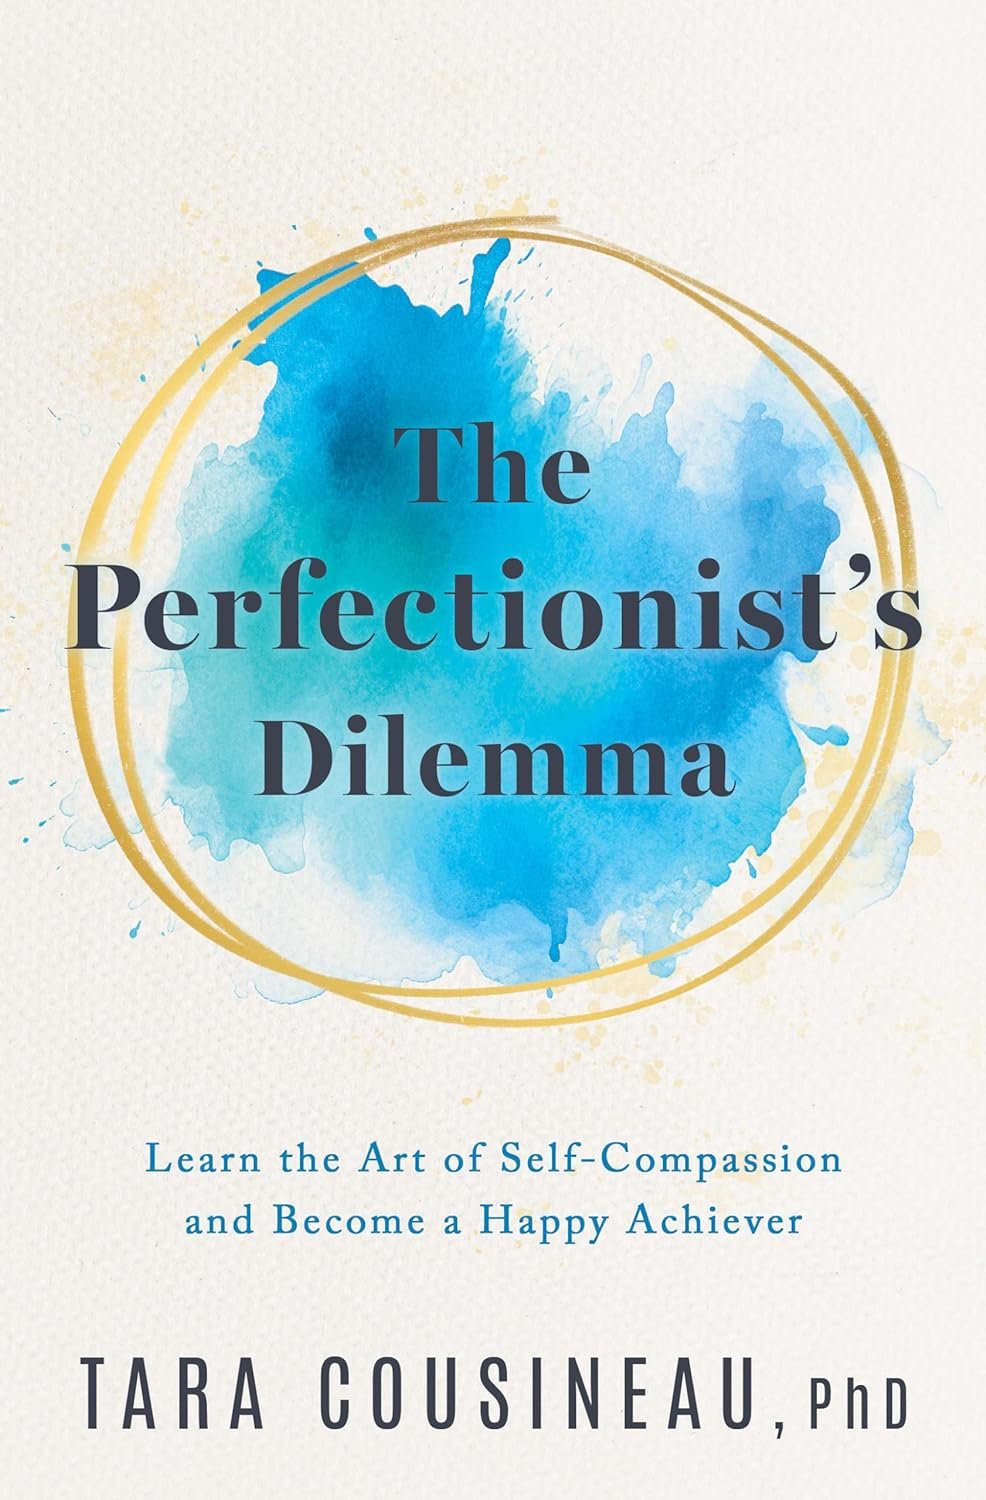 Break free of toxic perfectionism by cultivating emotional courage and self-compassion to face life's challenges with a 6-step program.